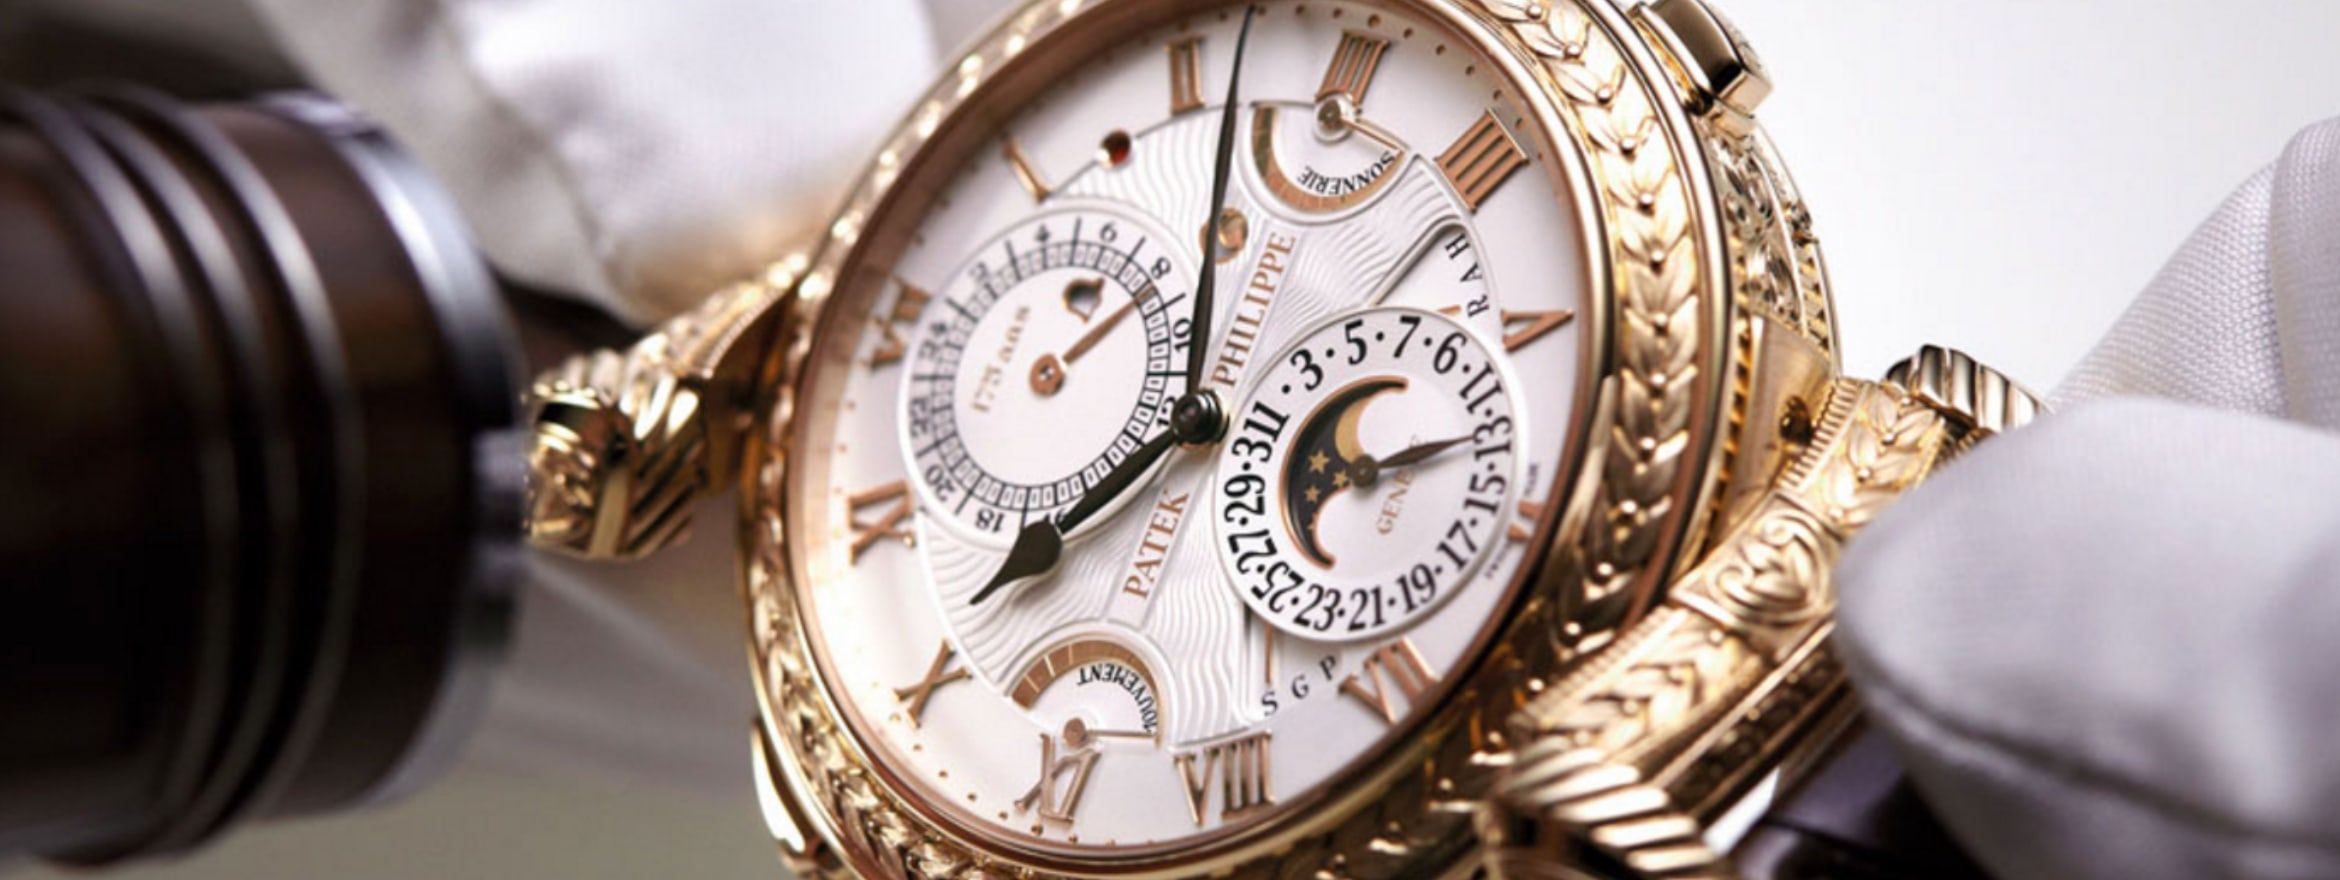 Behold the most extravagant watches that demand your attention